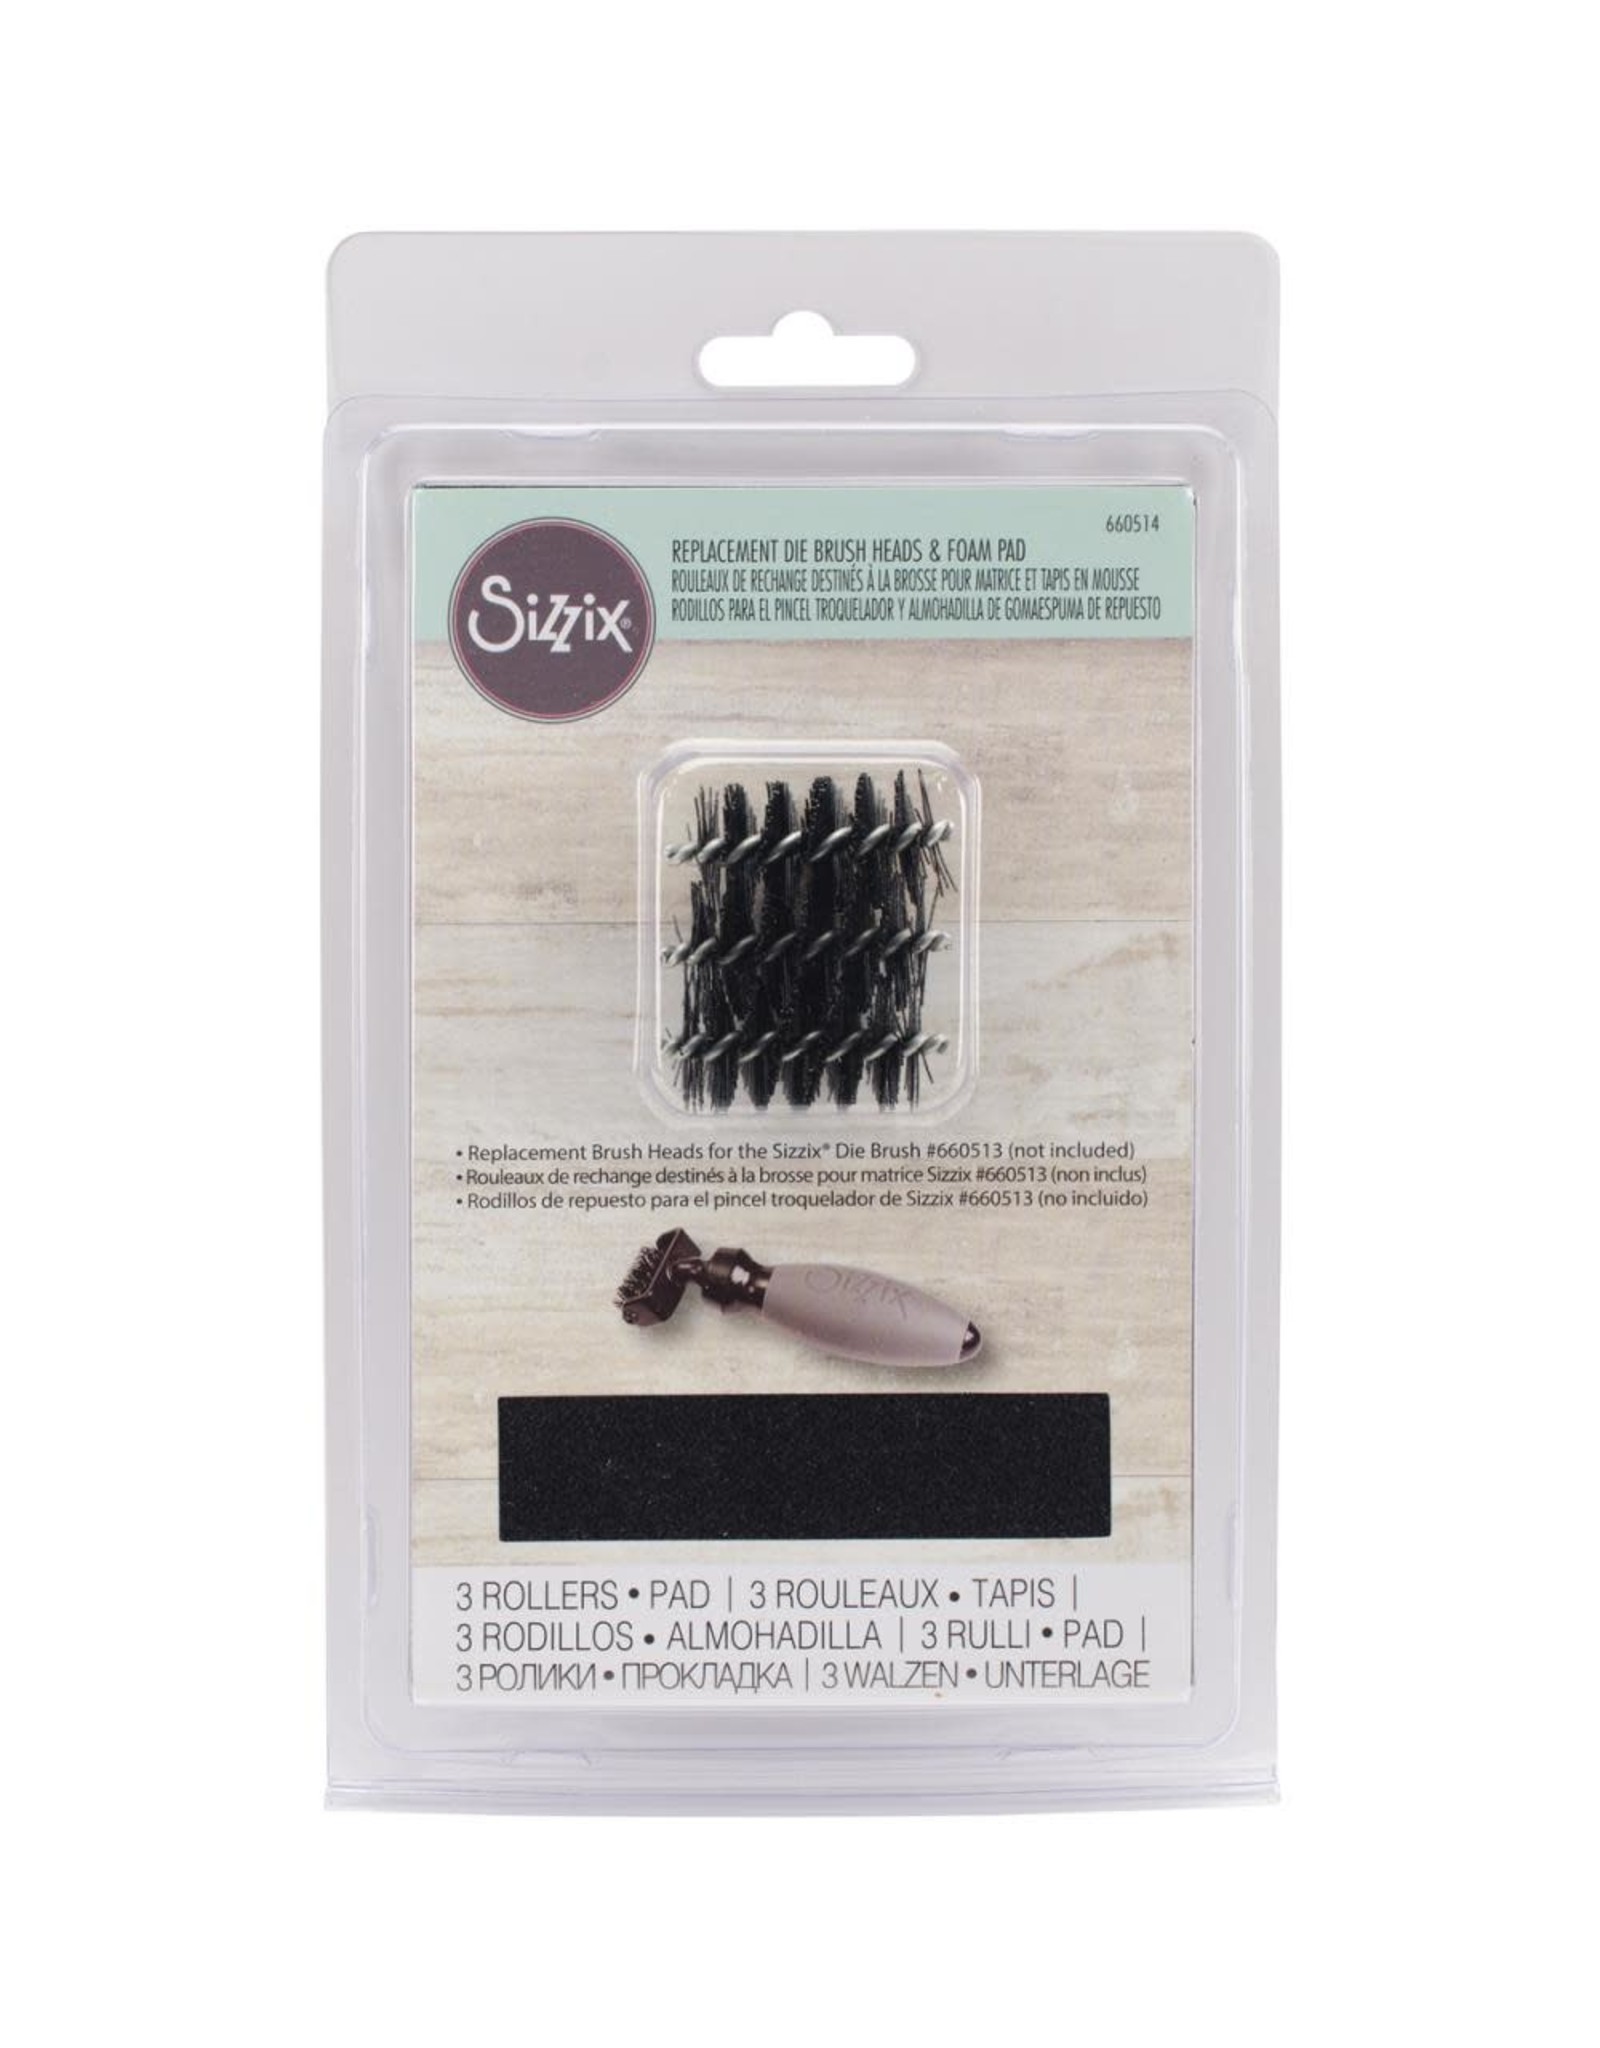 Sizzix SIZZIX BRUSH/PAD REPLACEMENT FOR 660513